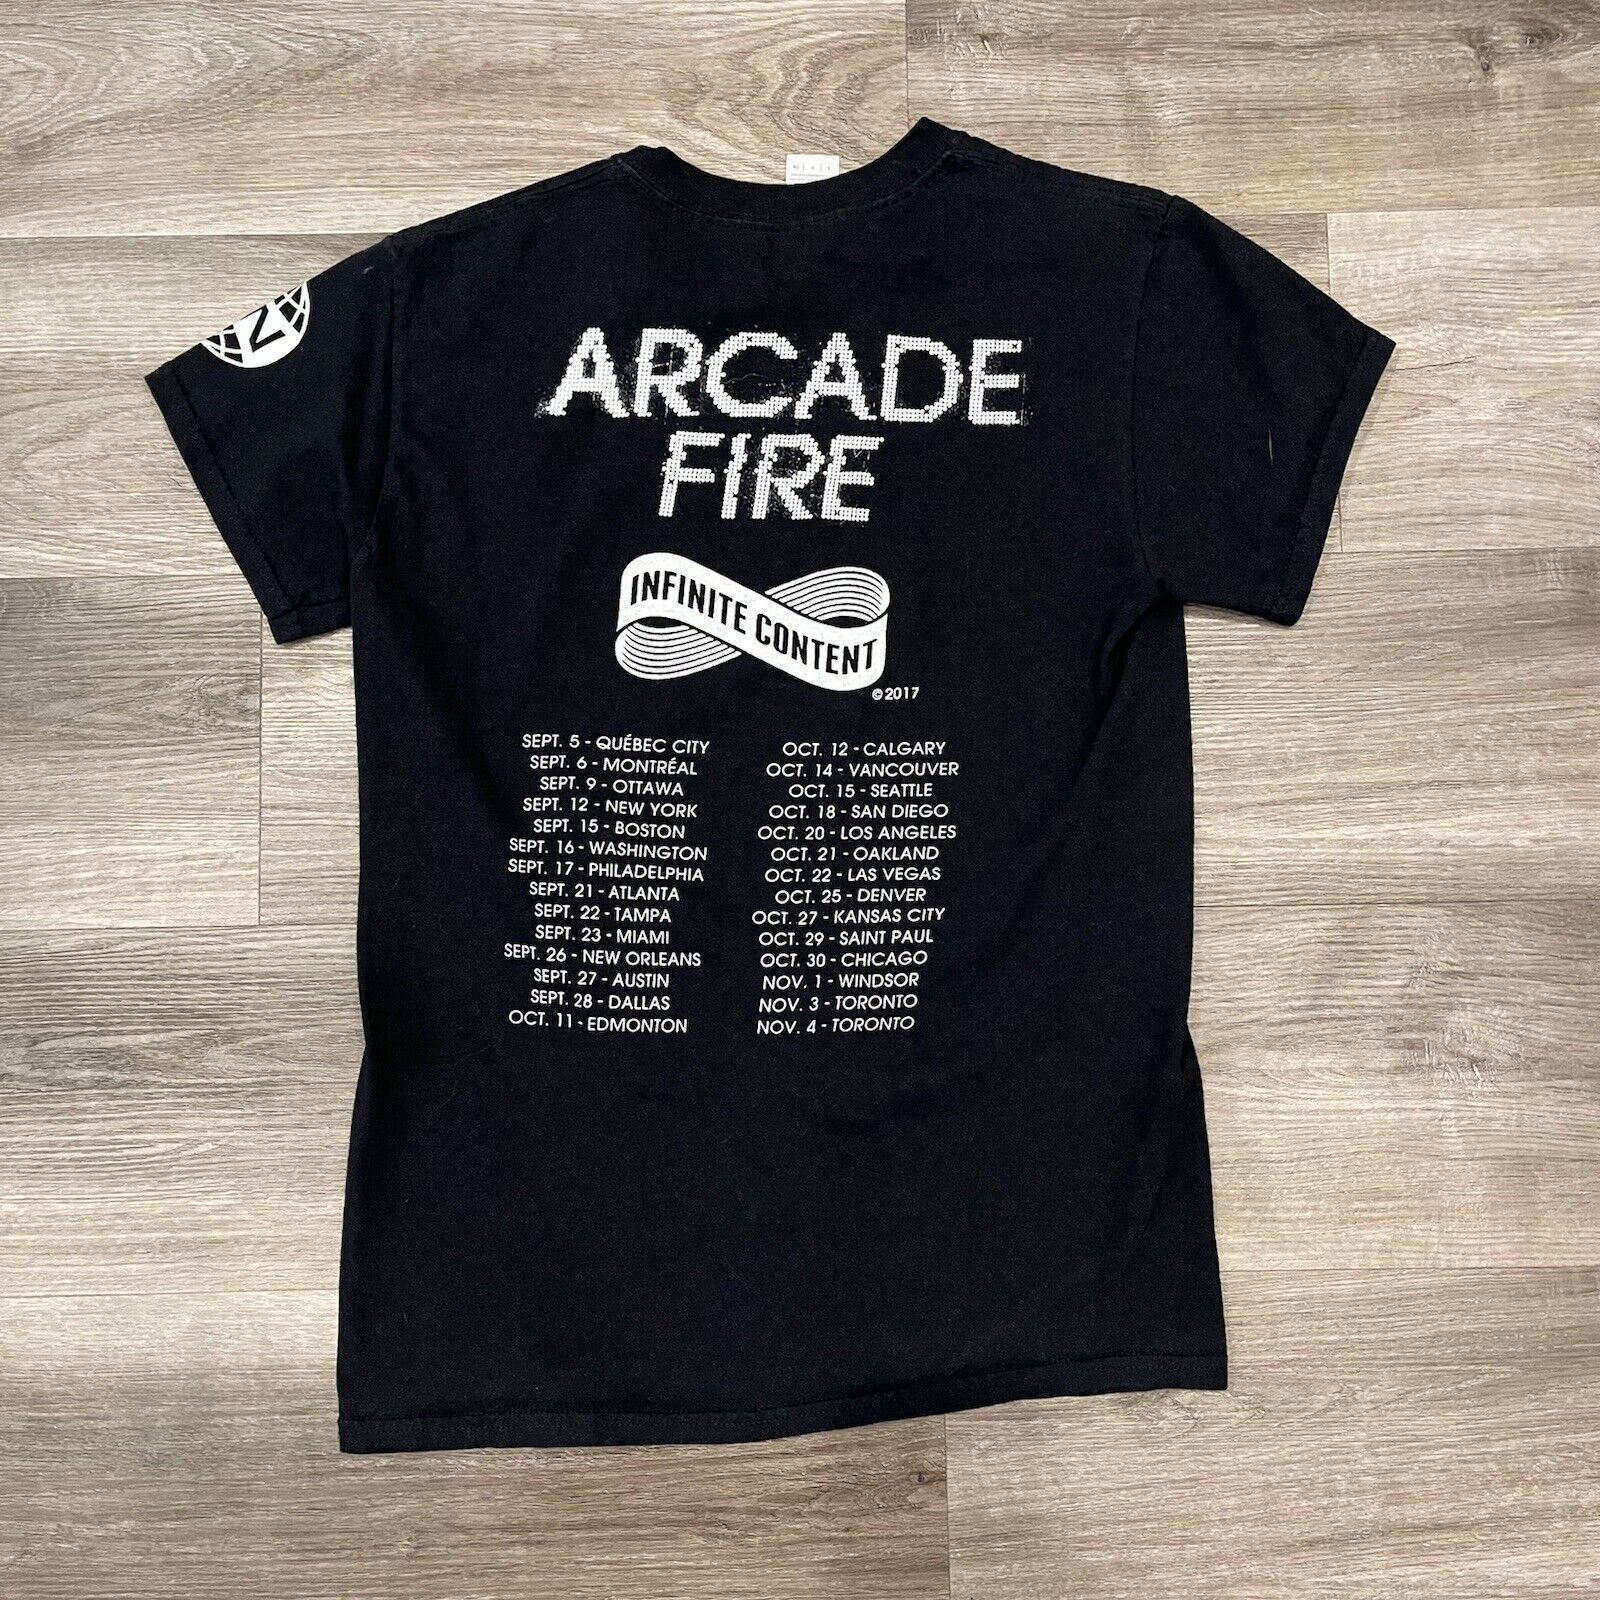 Arcade Fire Infinite Content 2017 Tour Band Shirt - Size: Small